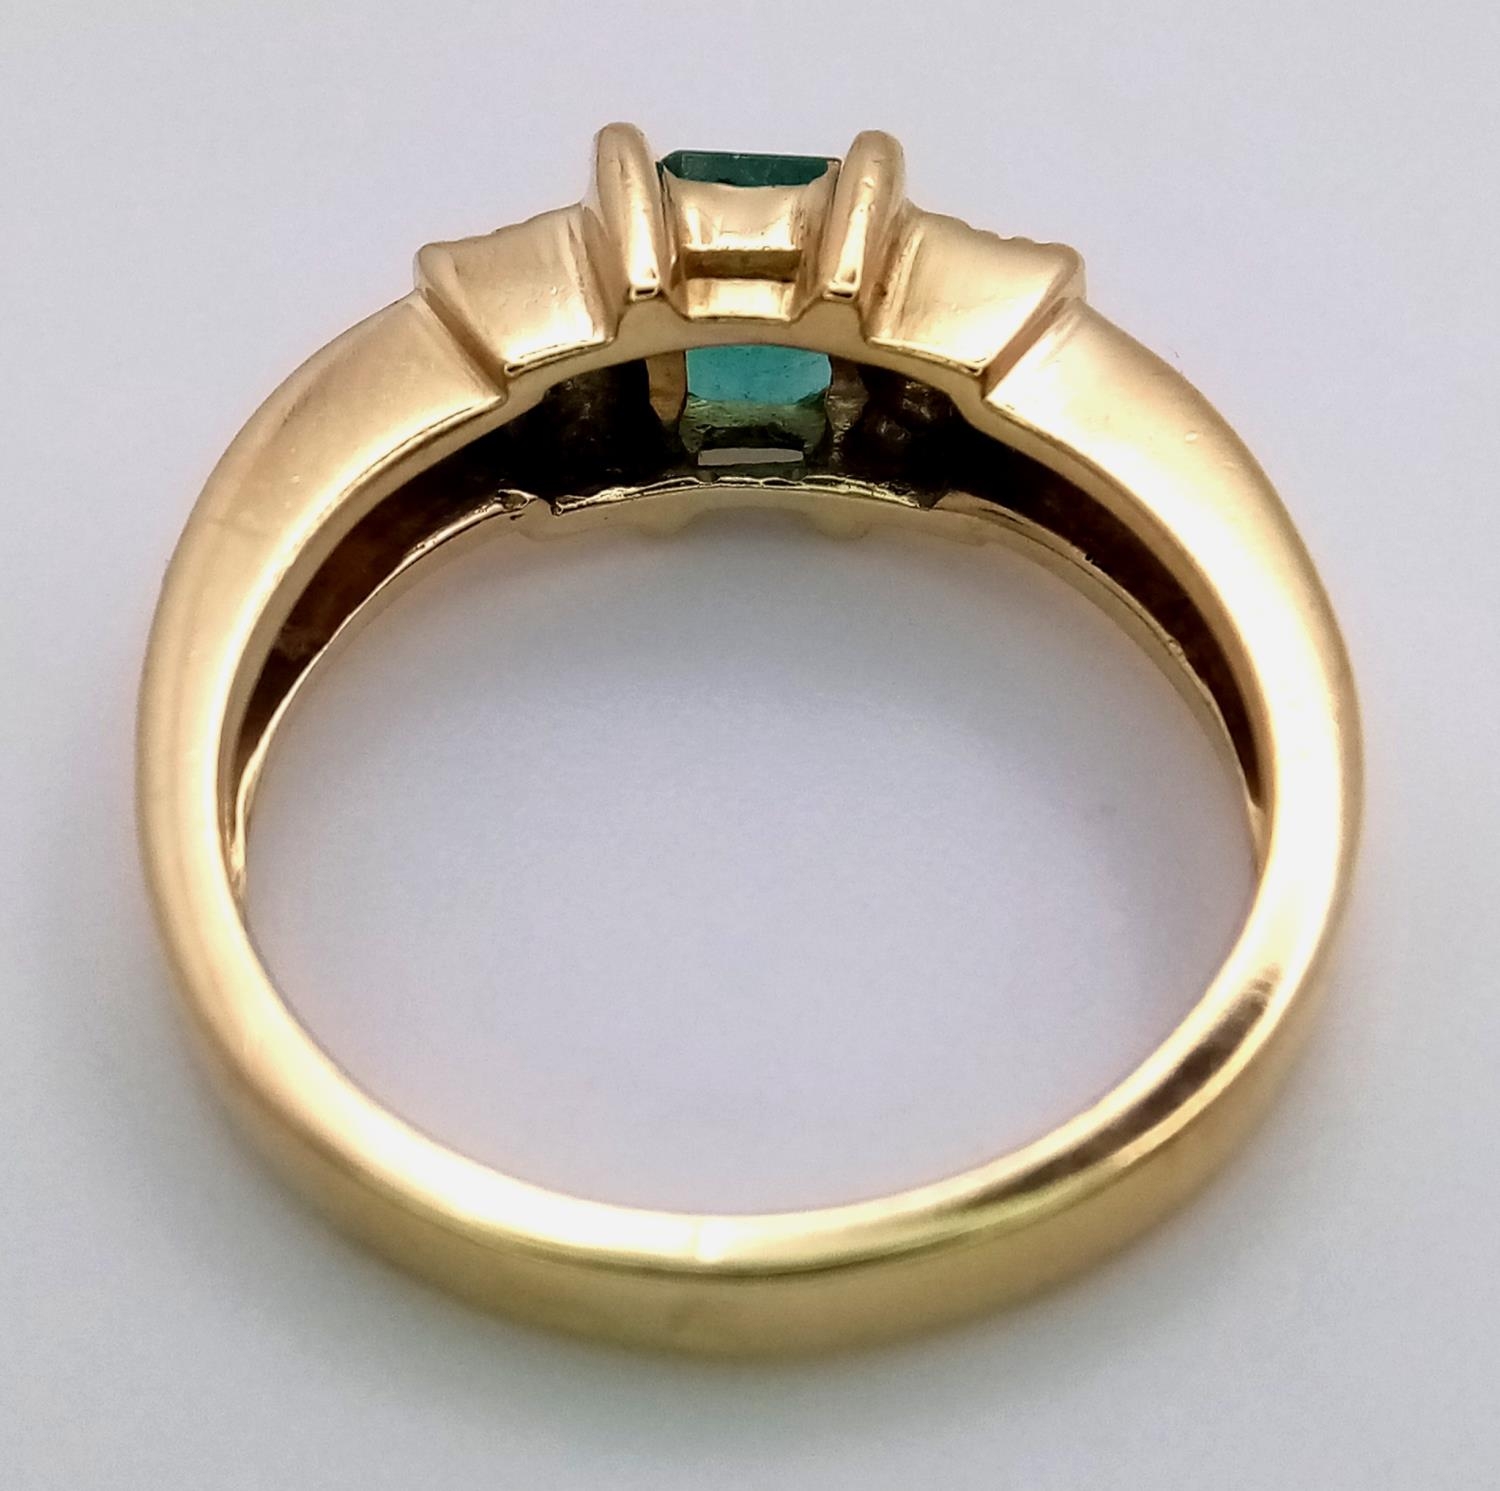 AN 18K (TESTED) YELLOW GOLD DIAMOND & EMERALD RING. Size N, 5.8g total weight. Ref: SC 9044 - Image 4 of 5